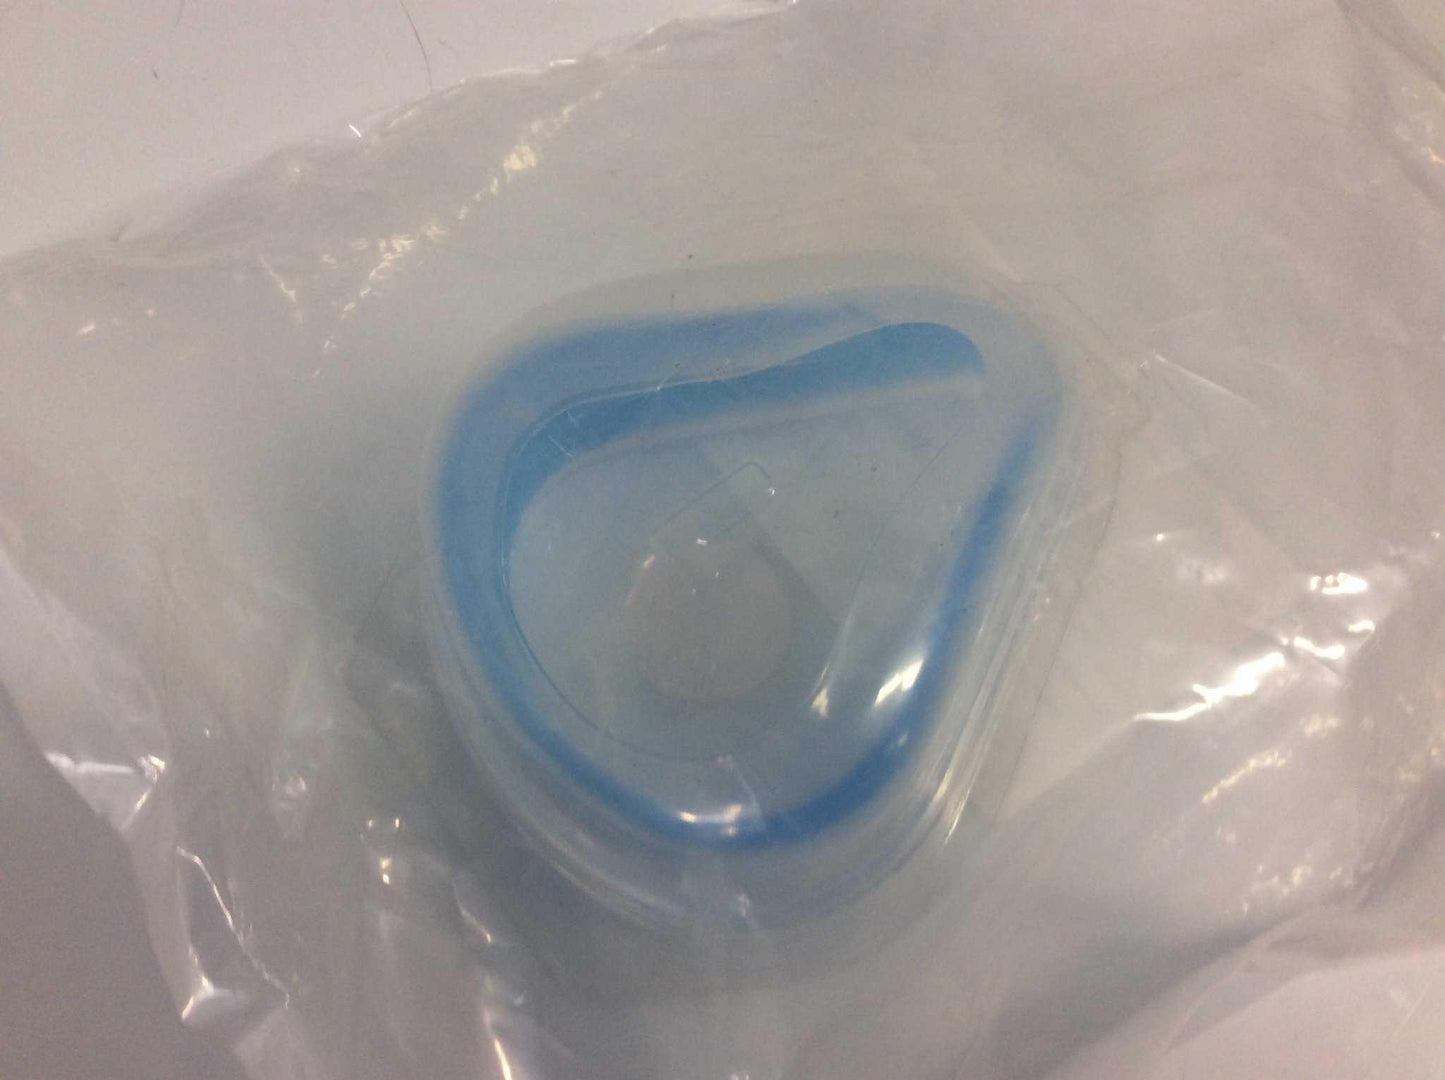 NEW Philips Respironics Large ComfortGel Blue Full Cushion 1081897 FREE Shipping - MBR Medicals